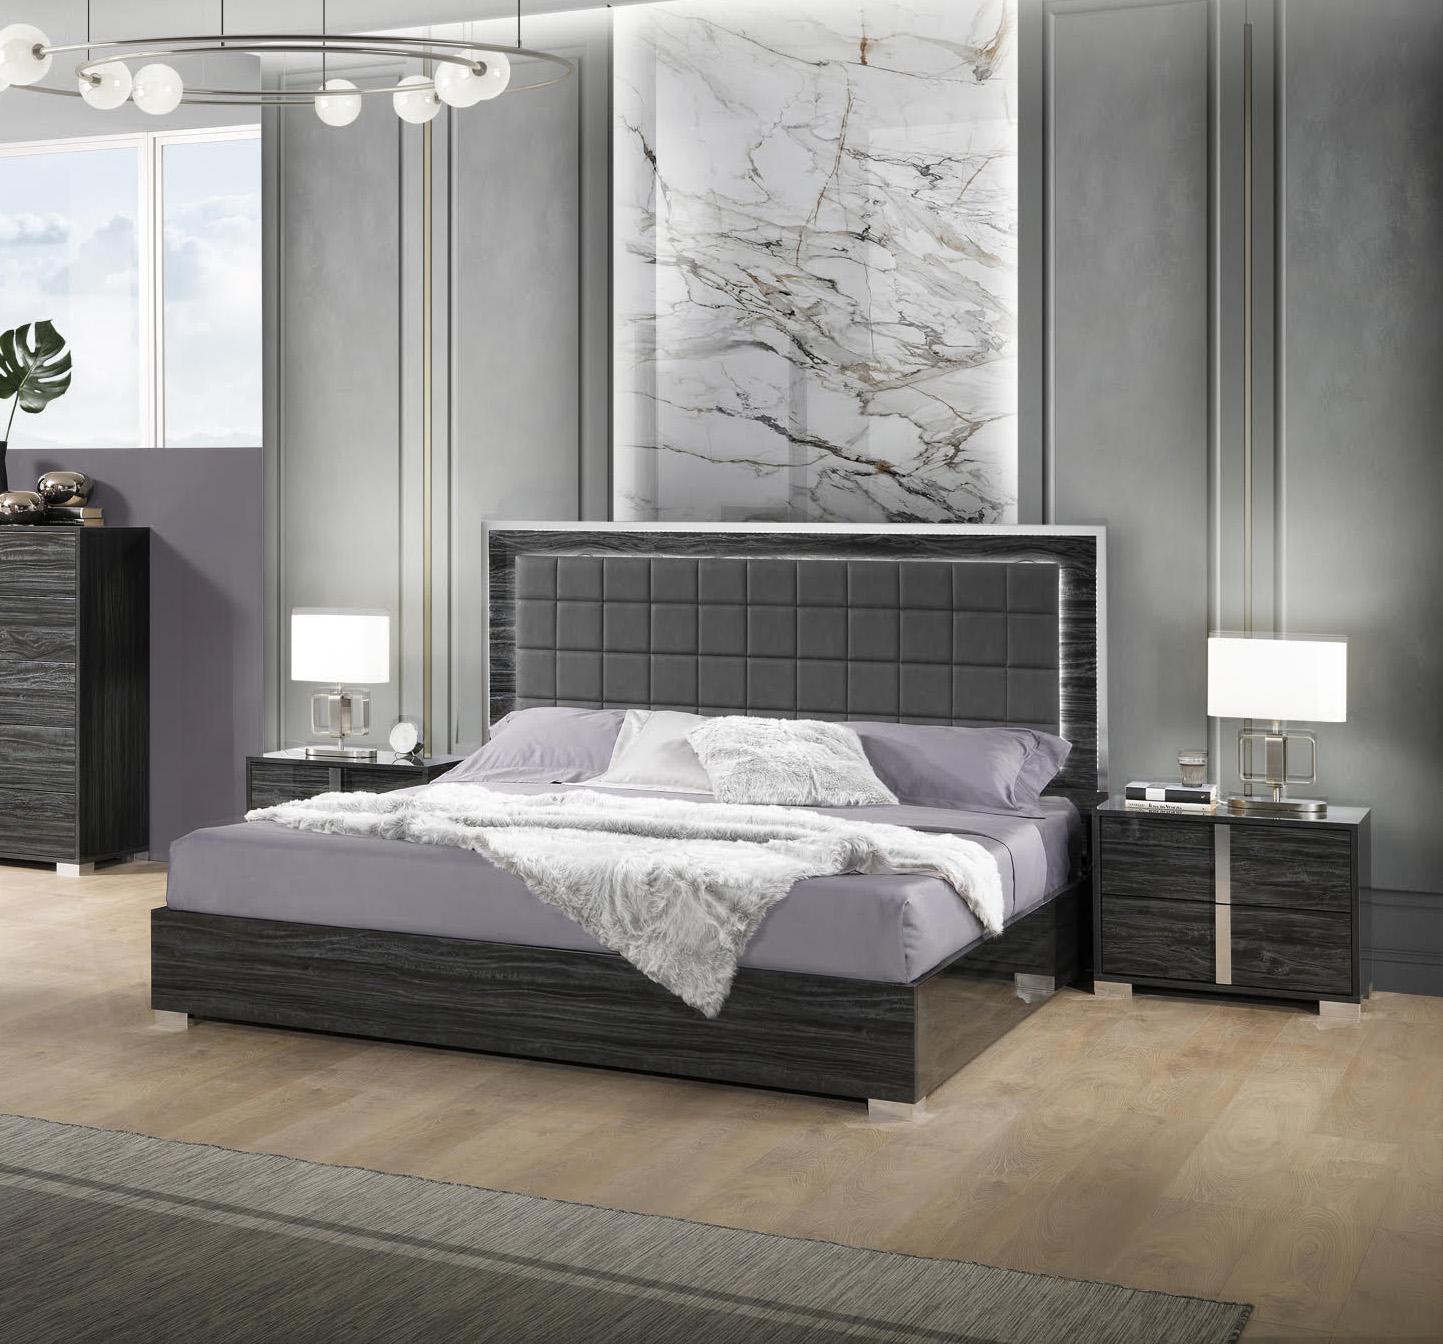 Contemporary Platform Bedroom Set Alice 15546-Q-3PC in Gray Leatherette